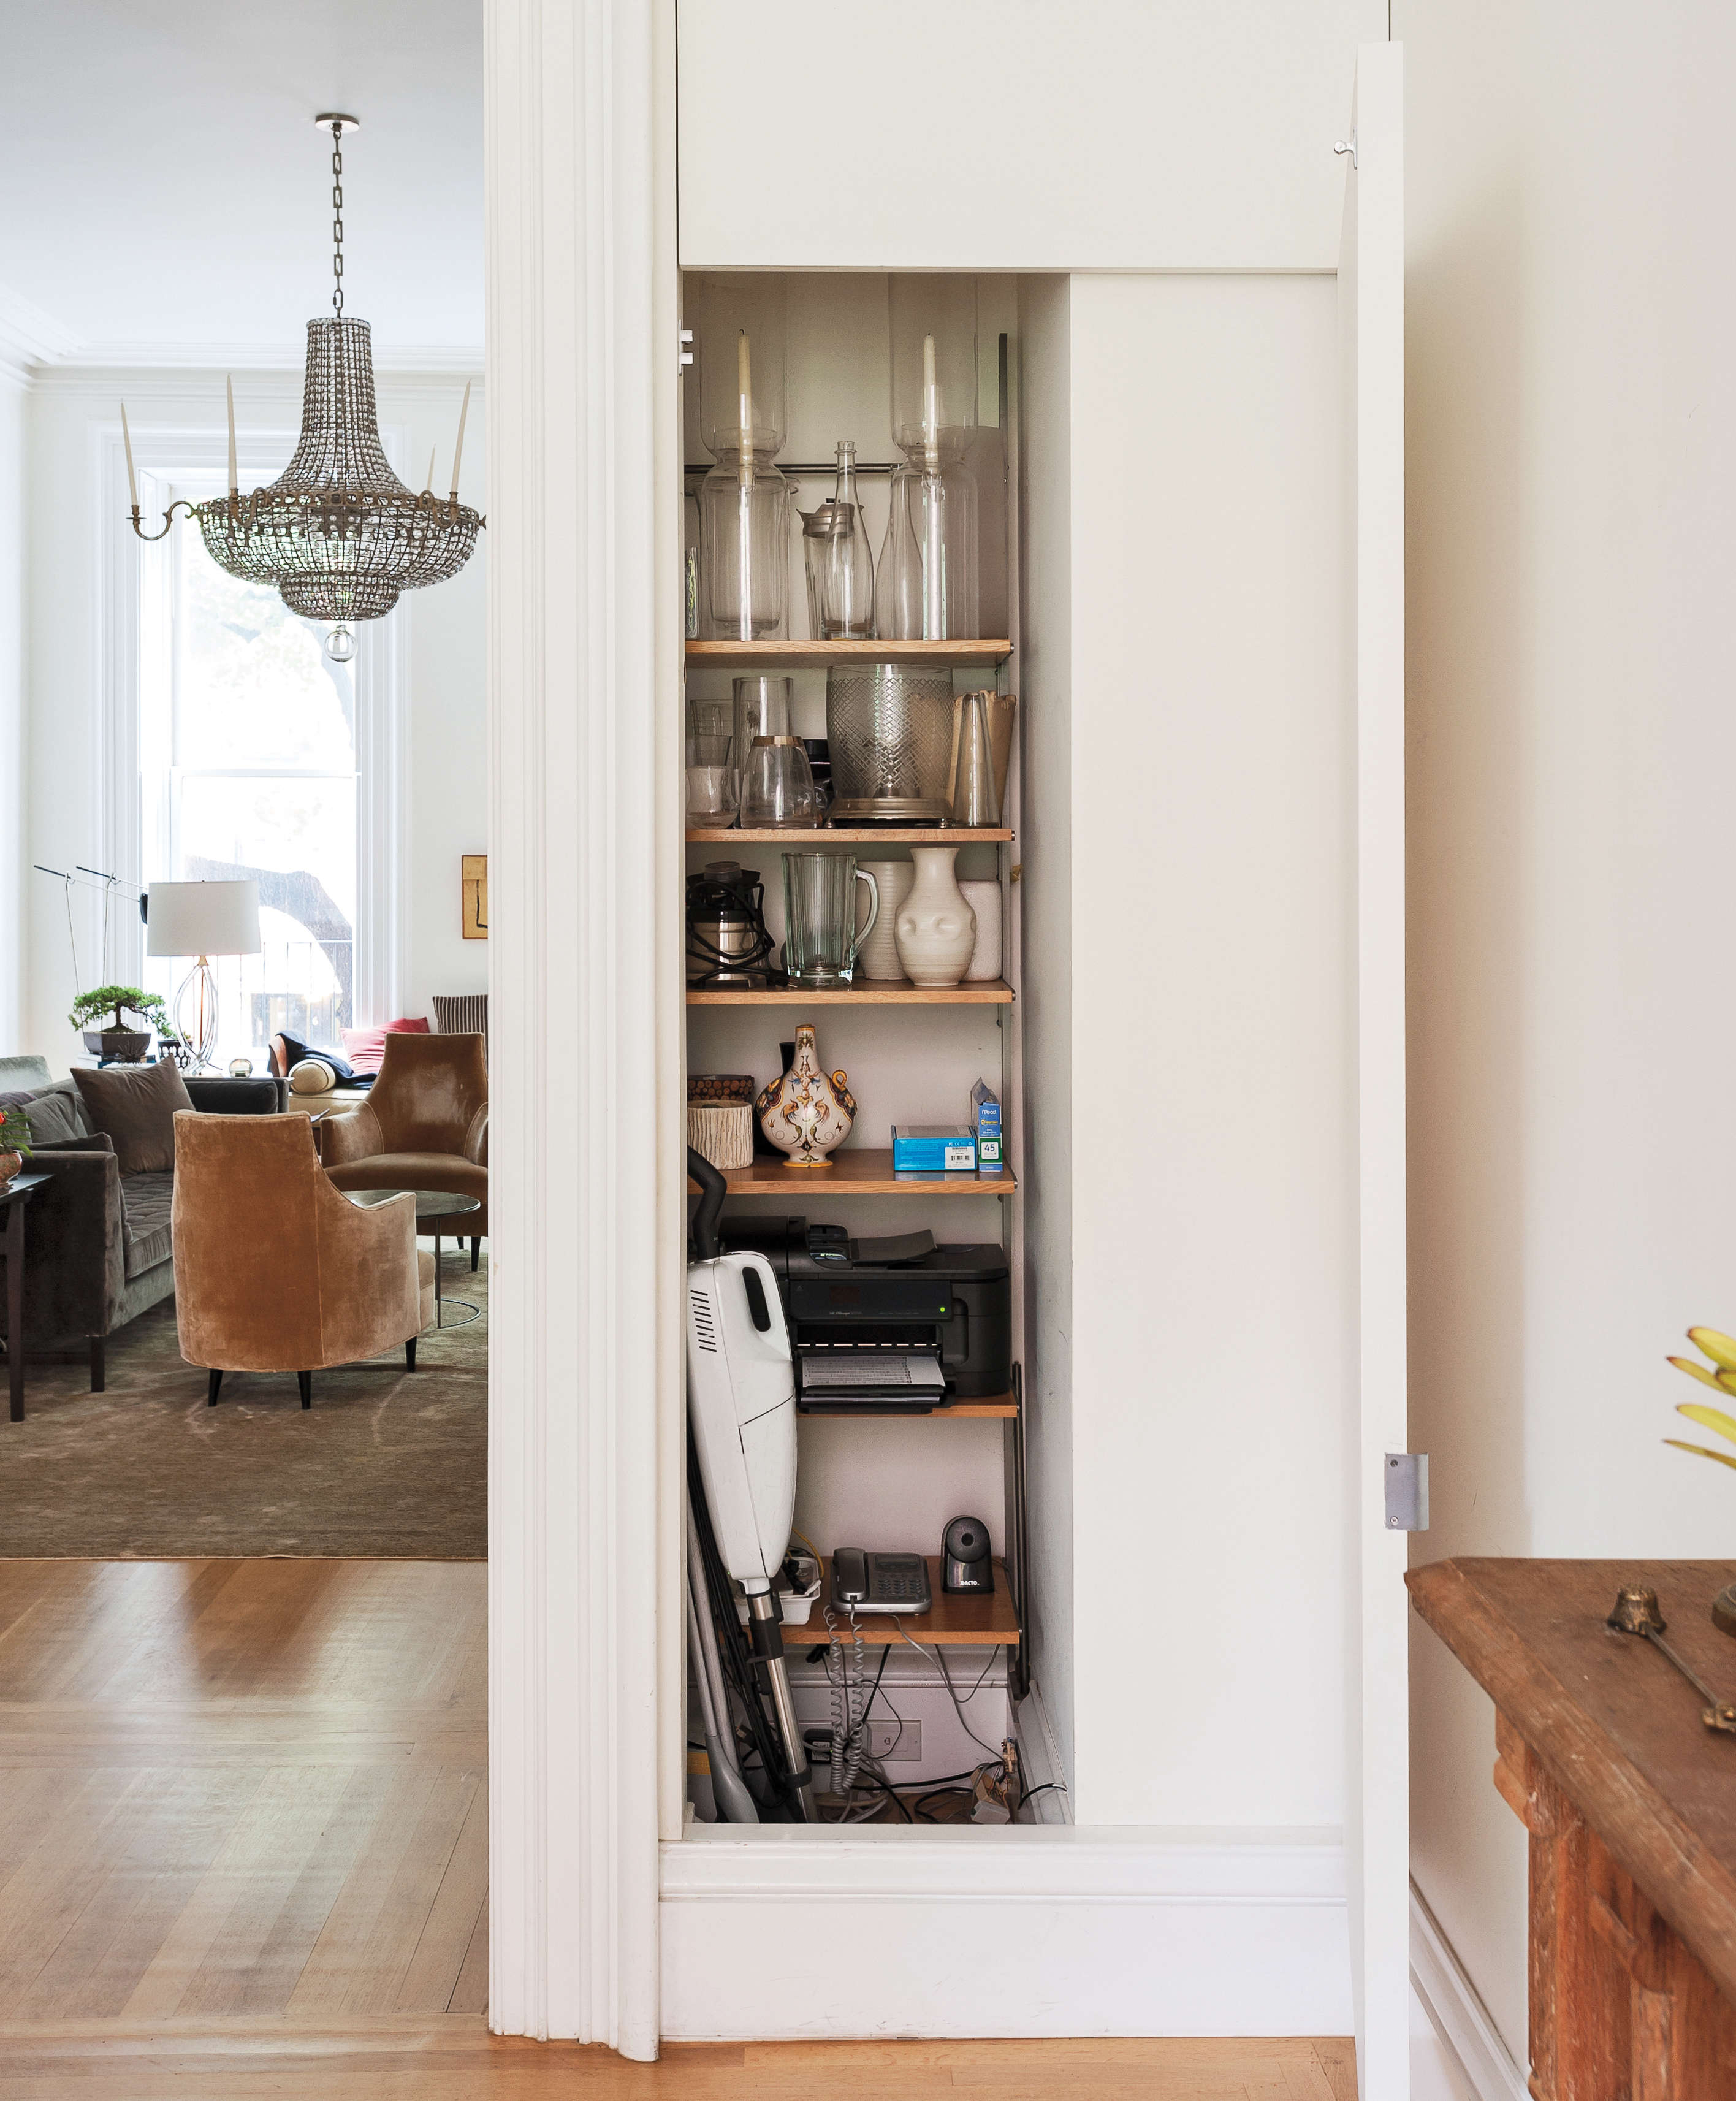 10 Easy Pieces: Compact Upright Vacuums for Small Spaces